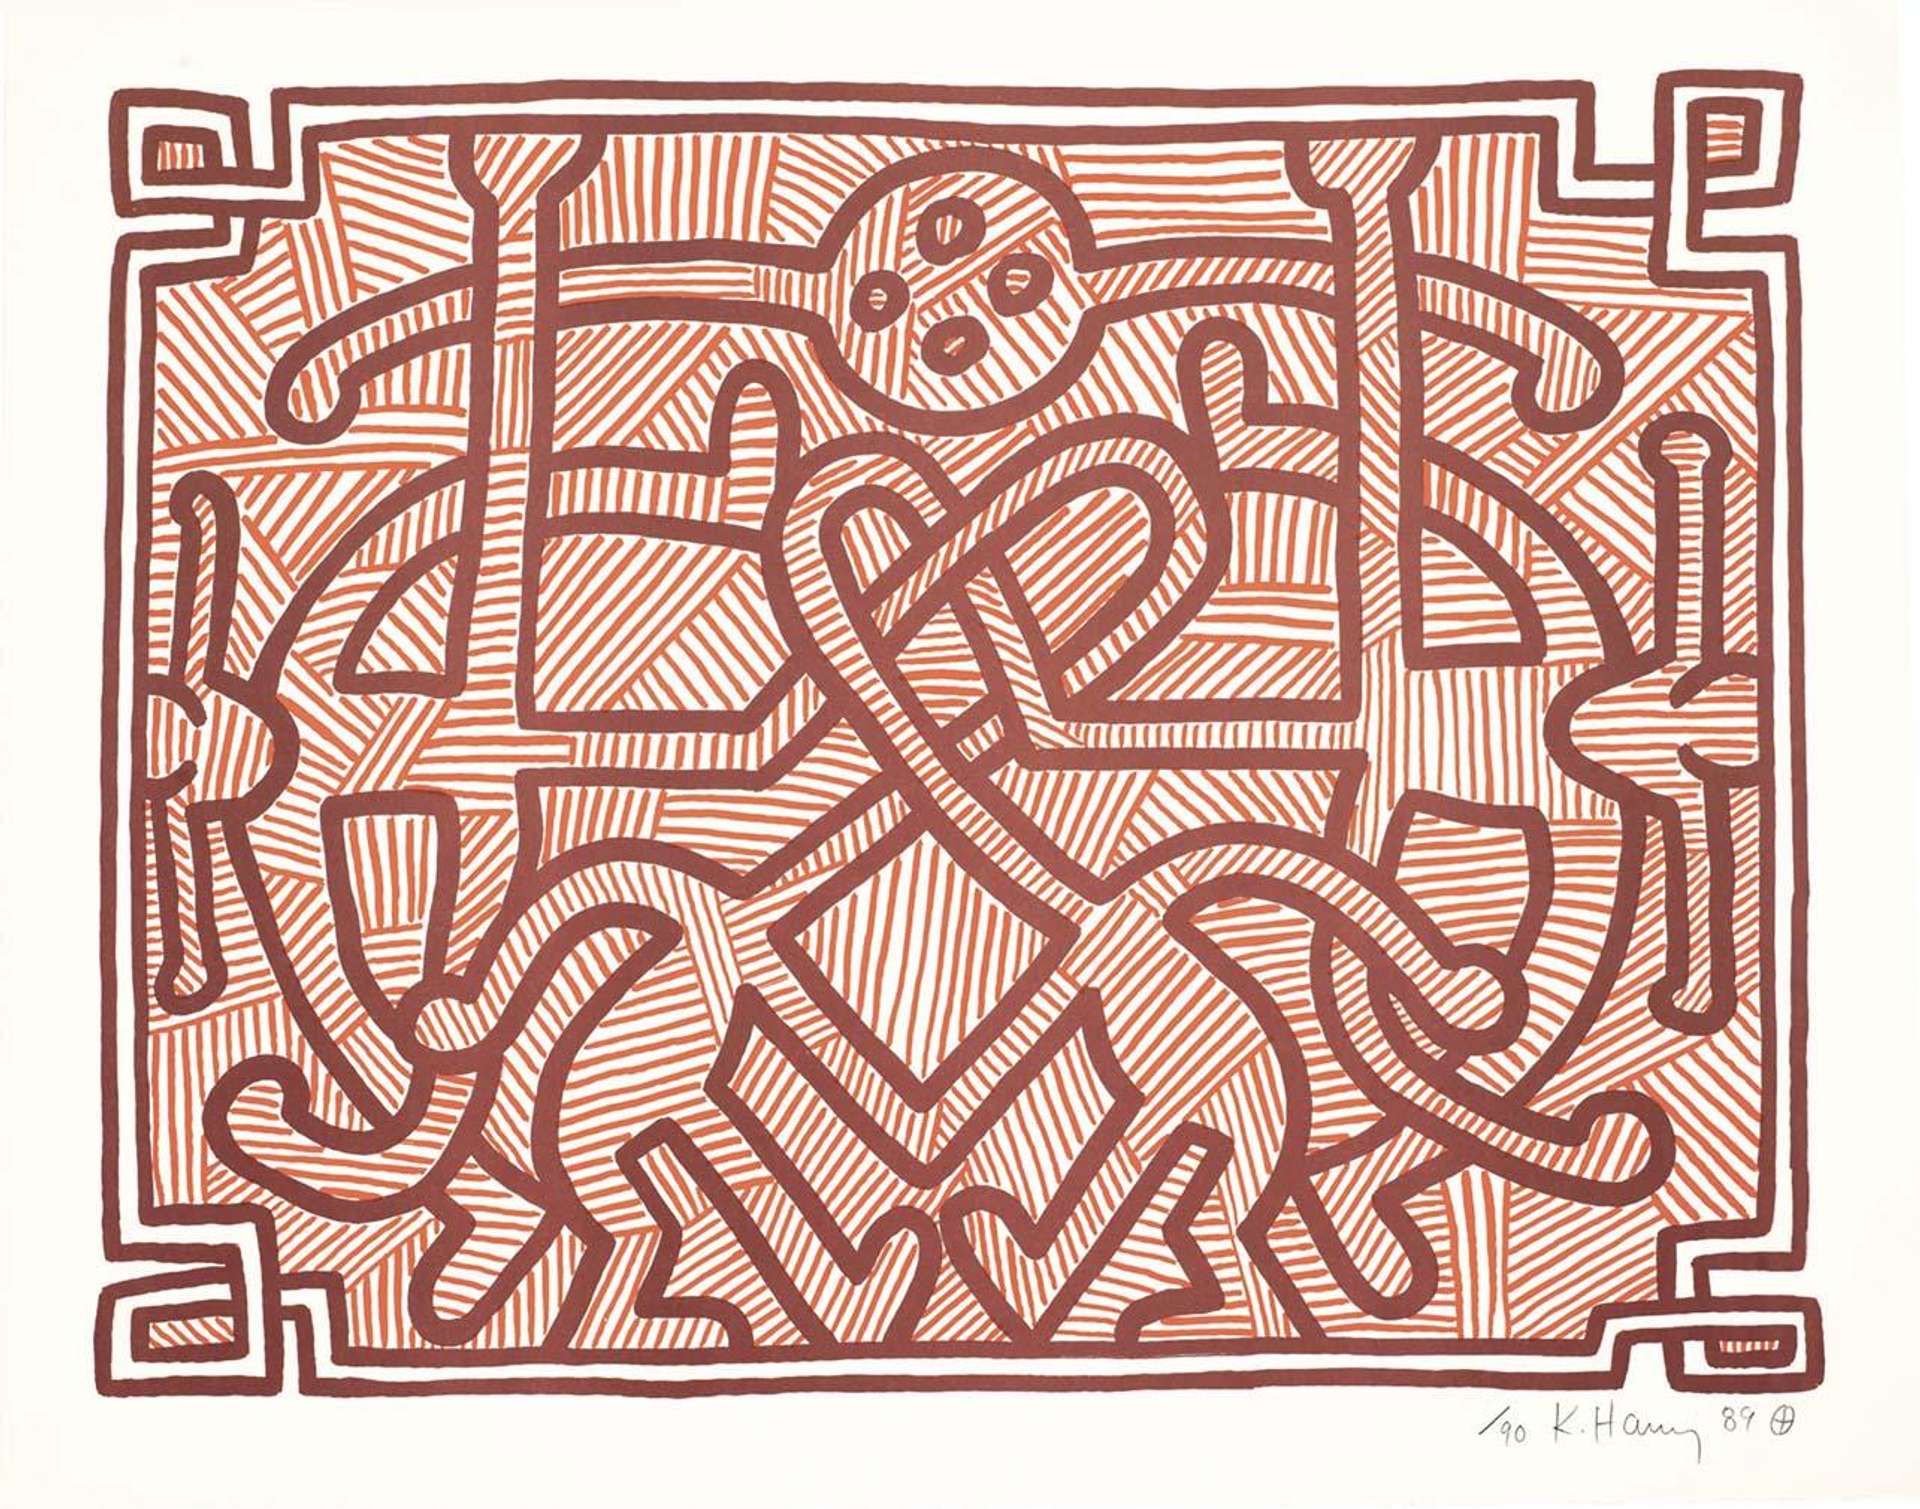 Keith Haring’s Chocolate Buddha 2. A Pop Art lithograph of four figures interconnected through symmetrical red lines against a striped, red background.